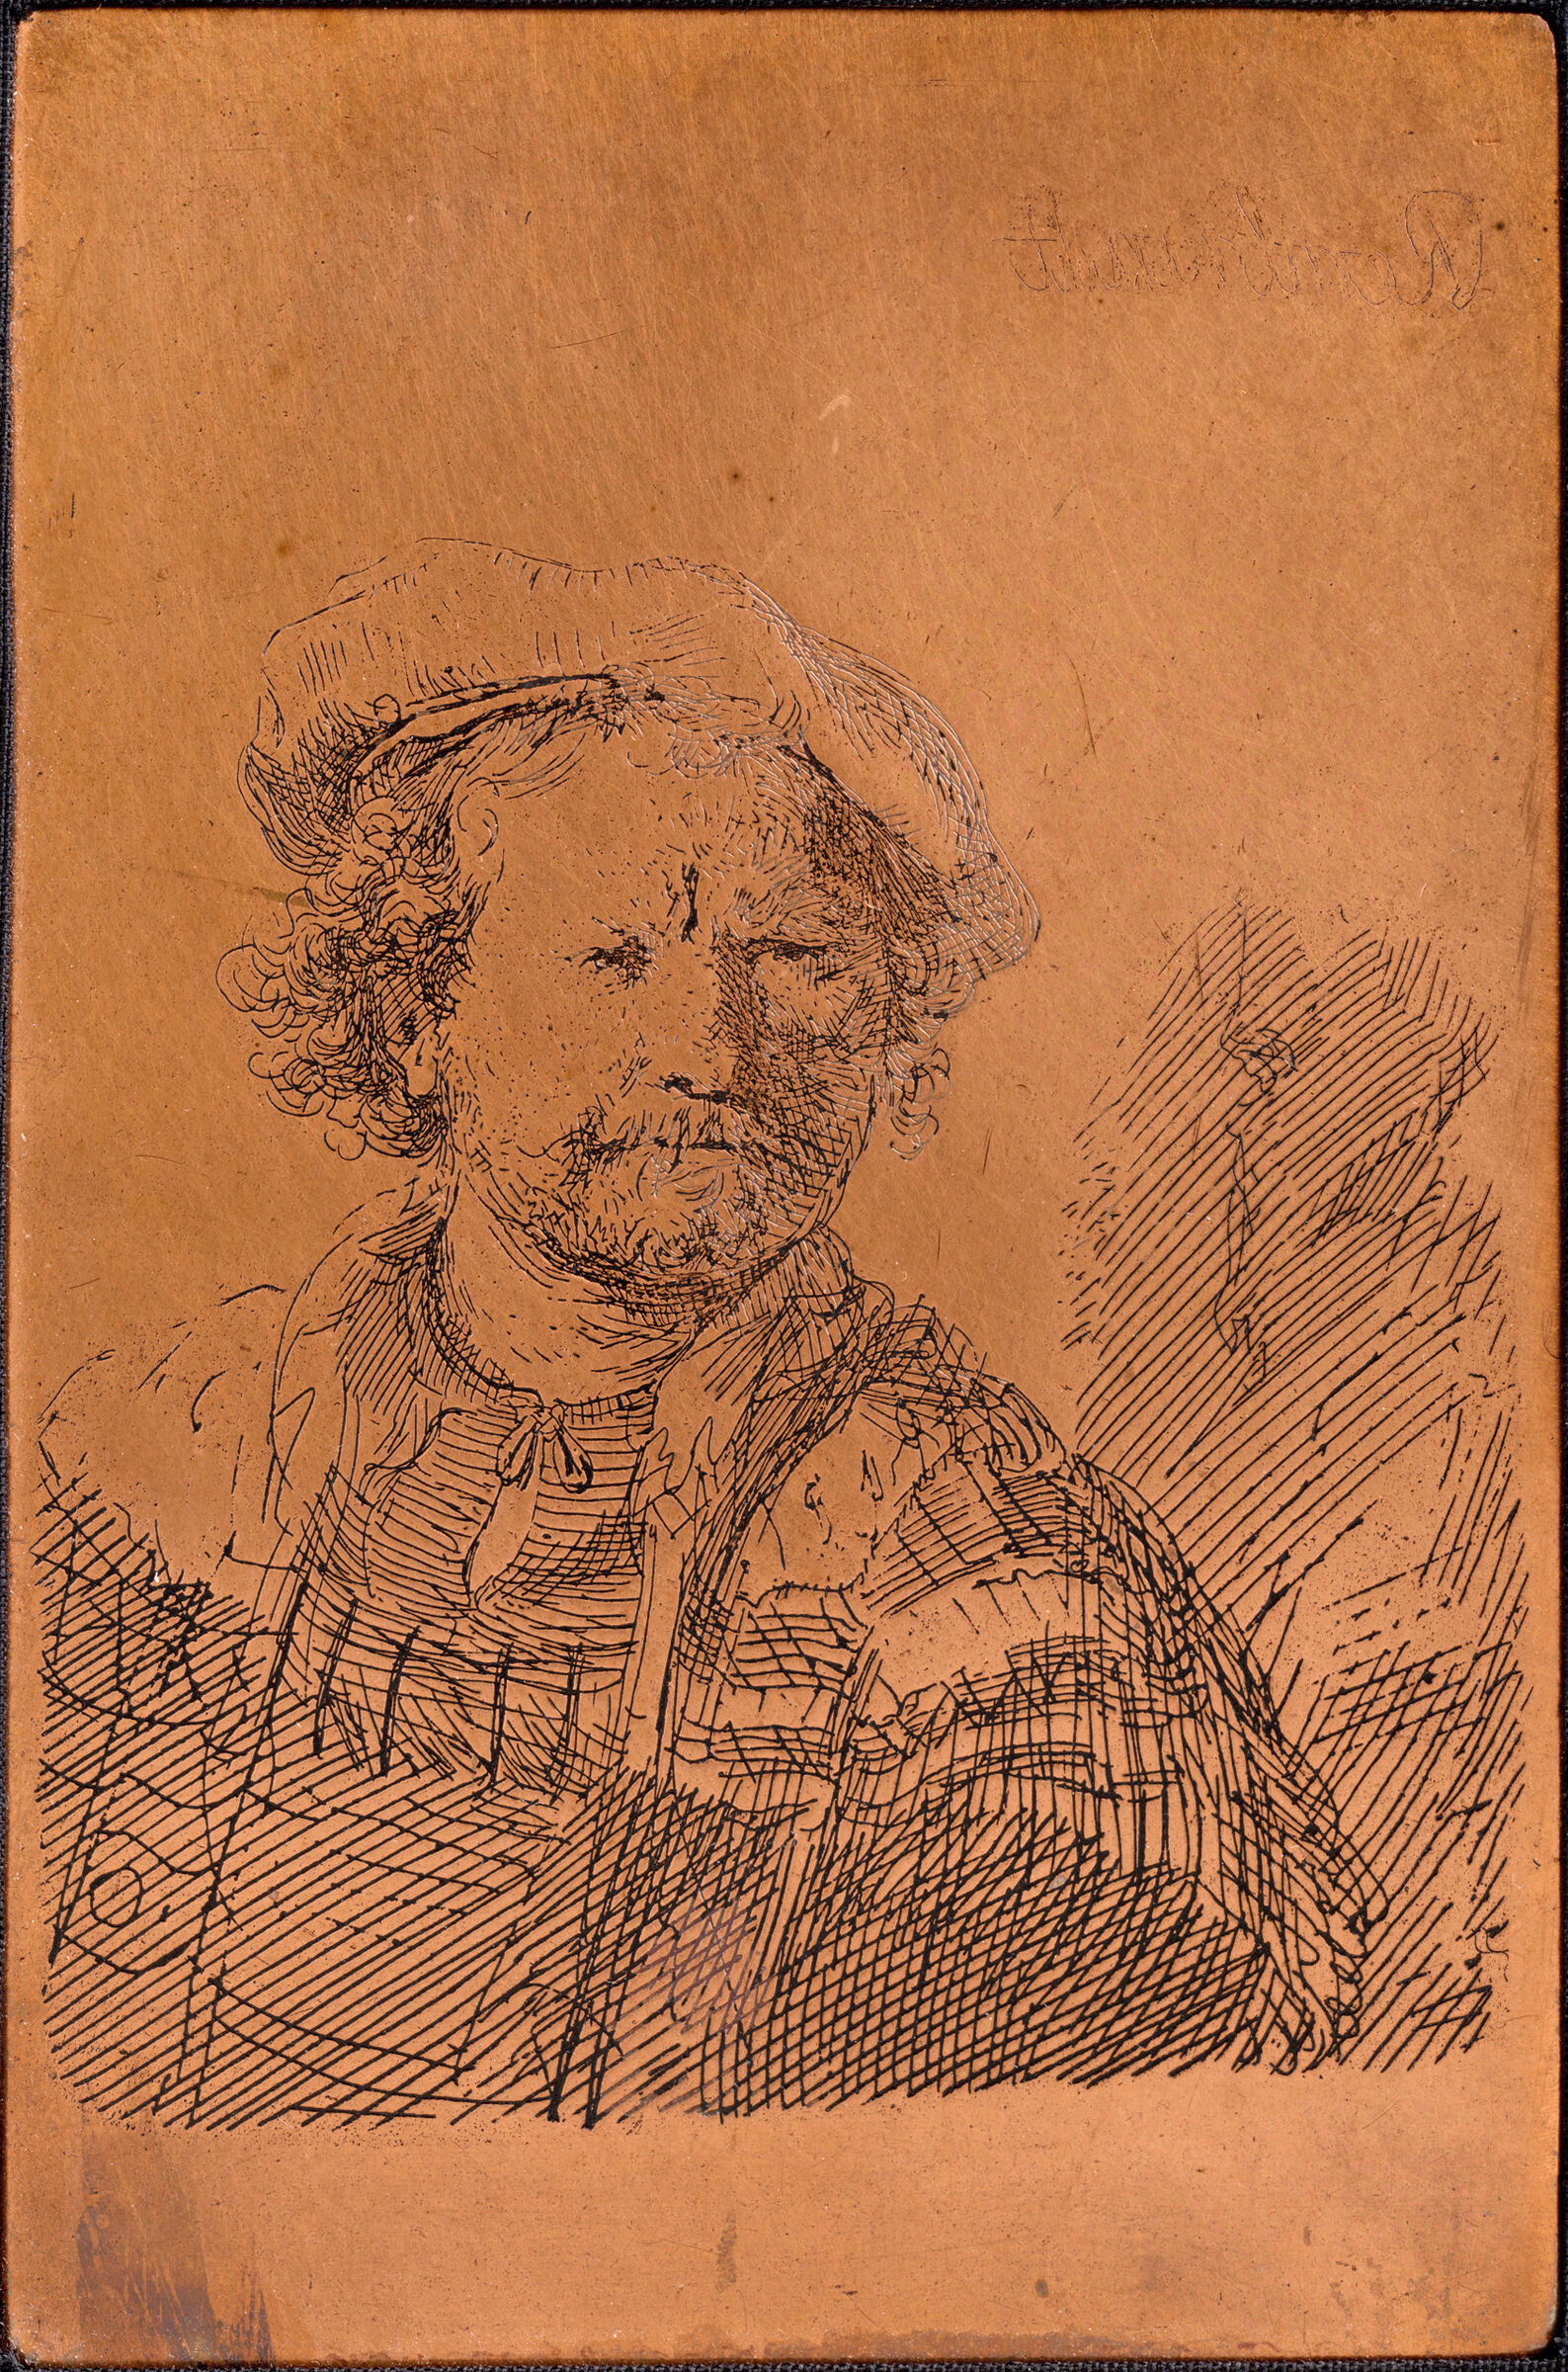 Copper Plate: Self-Portrait In A Flat Cap And Embroidered Dress